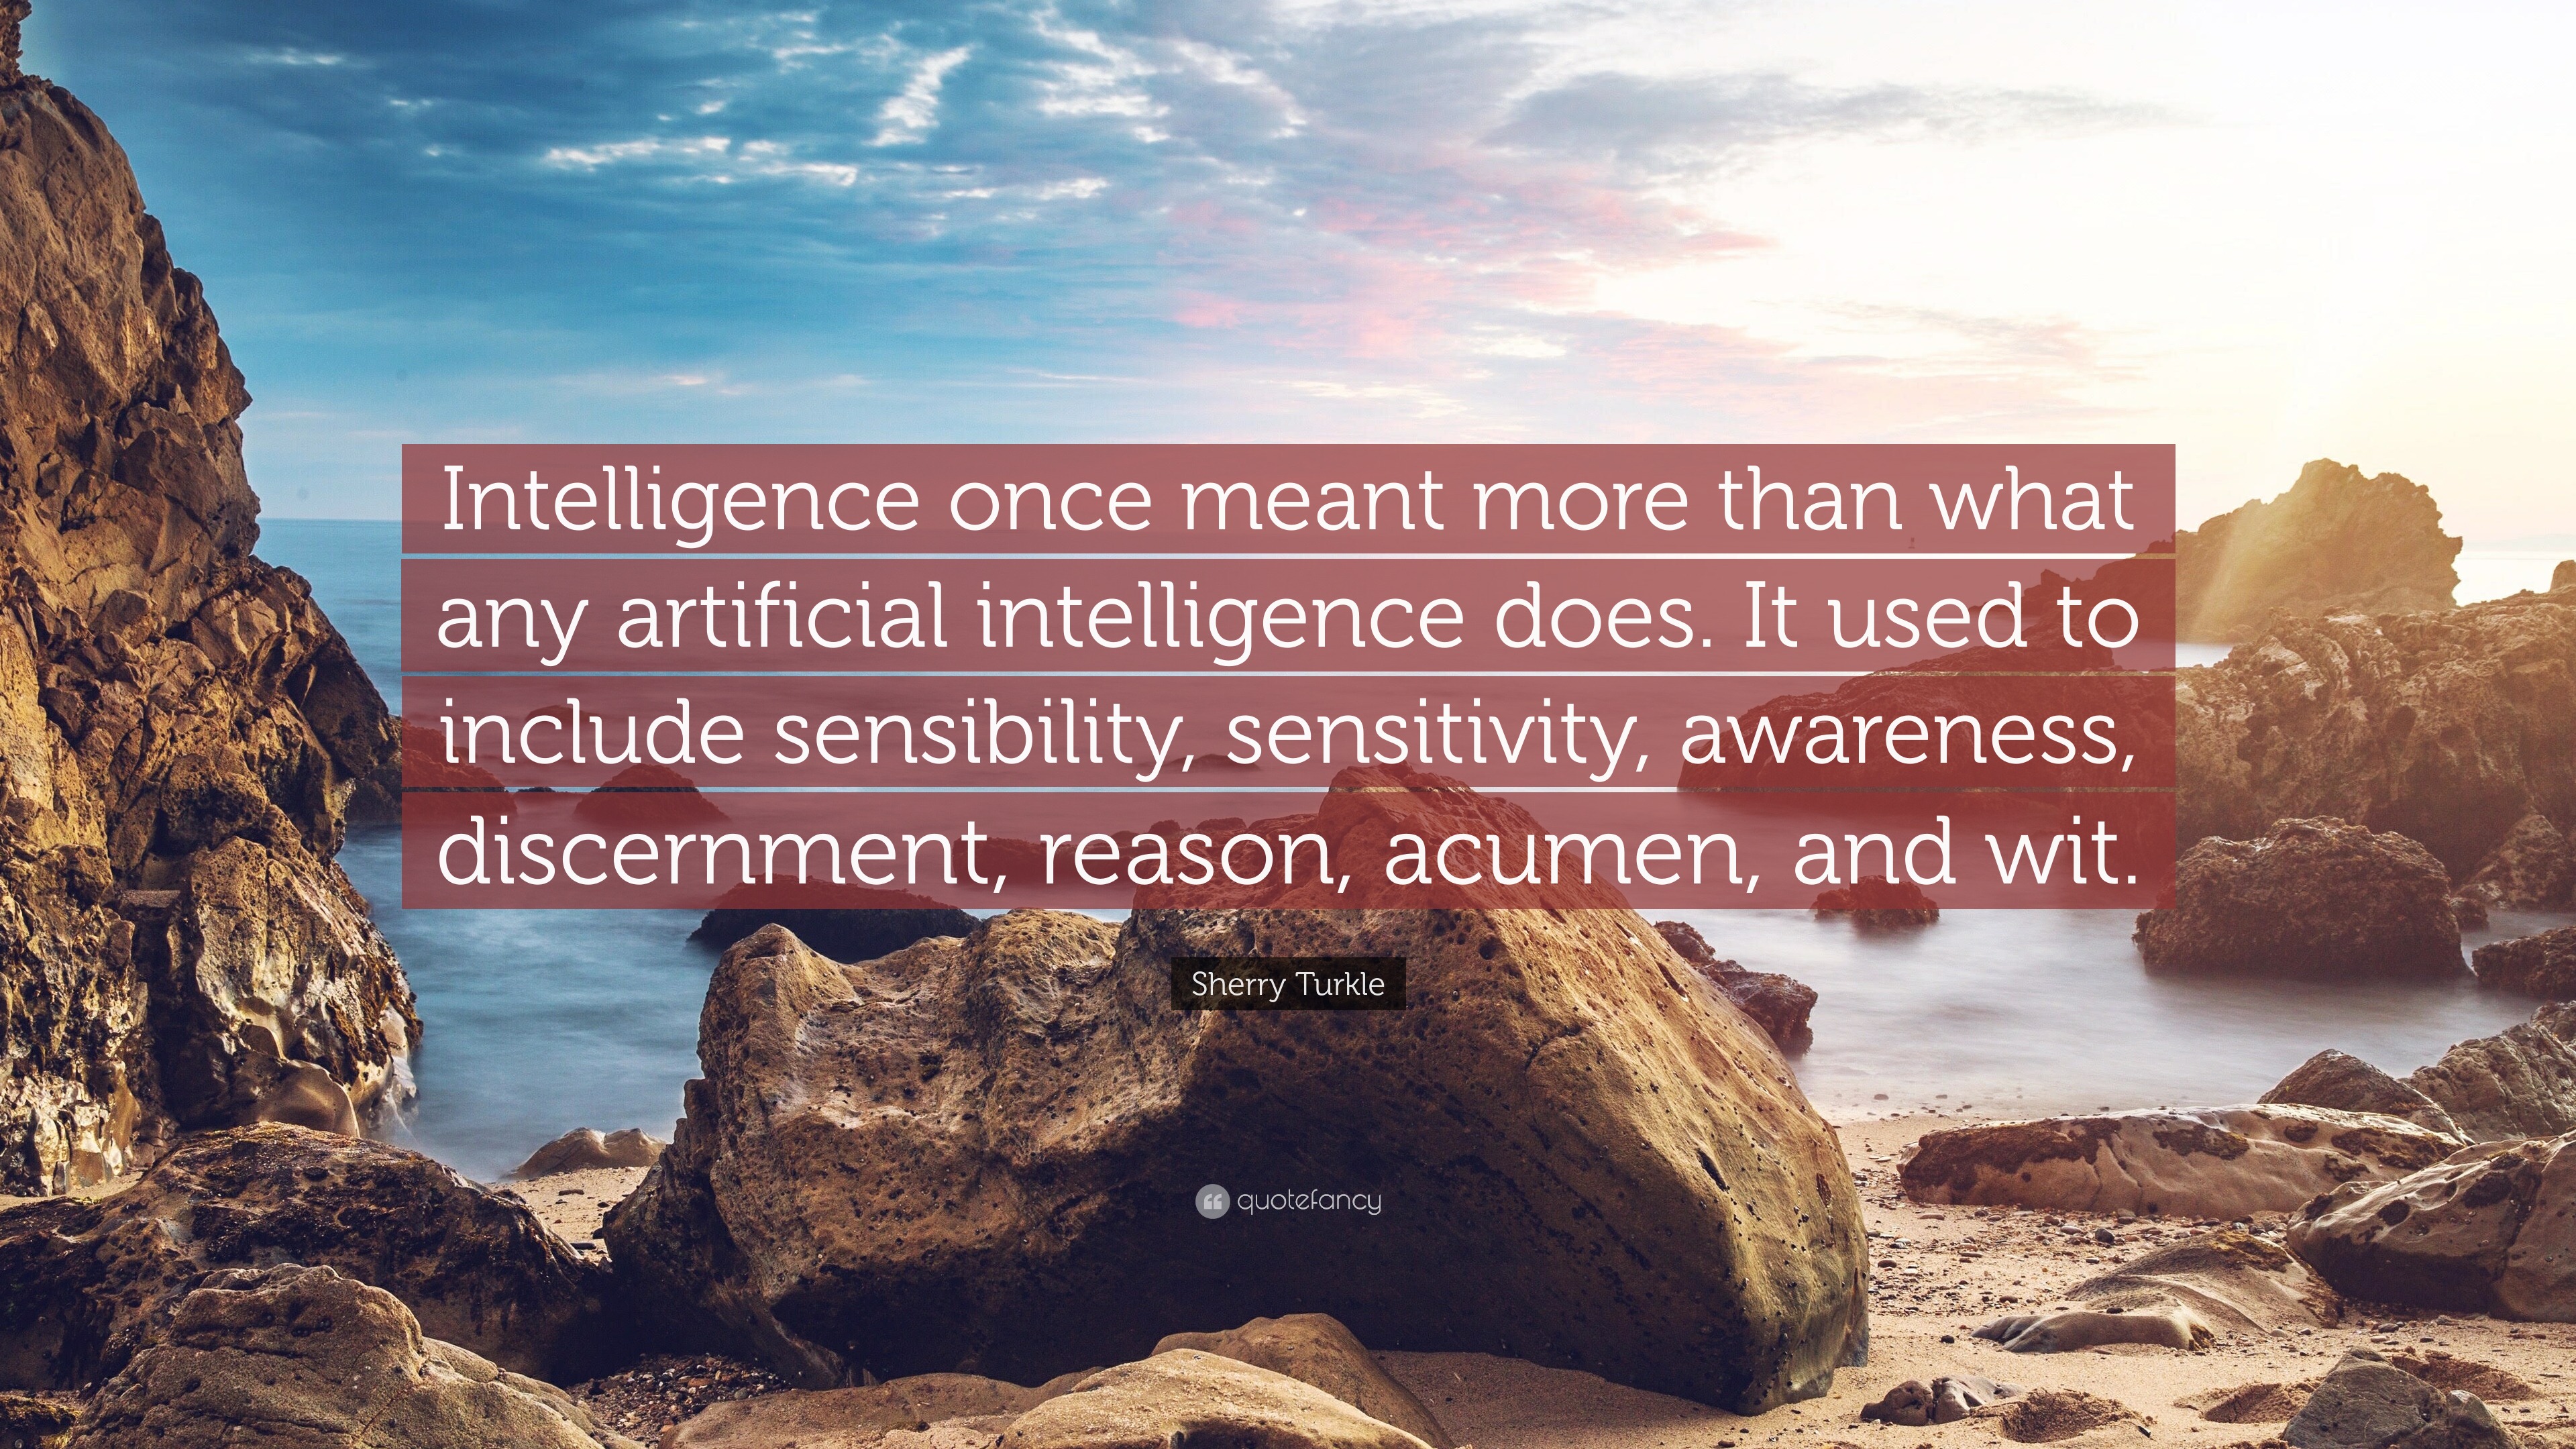 Sherry Turkle Quote: “Intelligence once meant more than what any ...